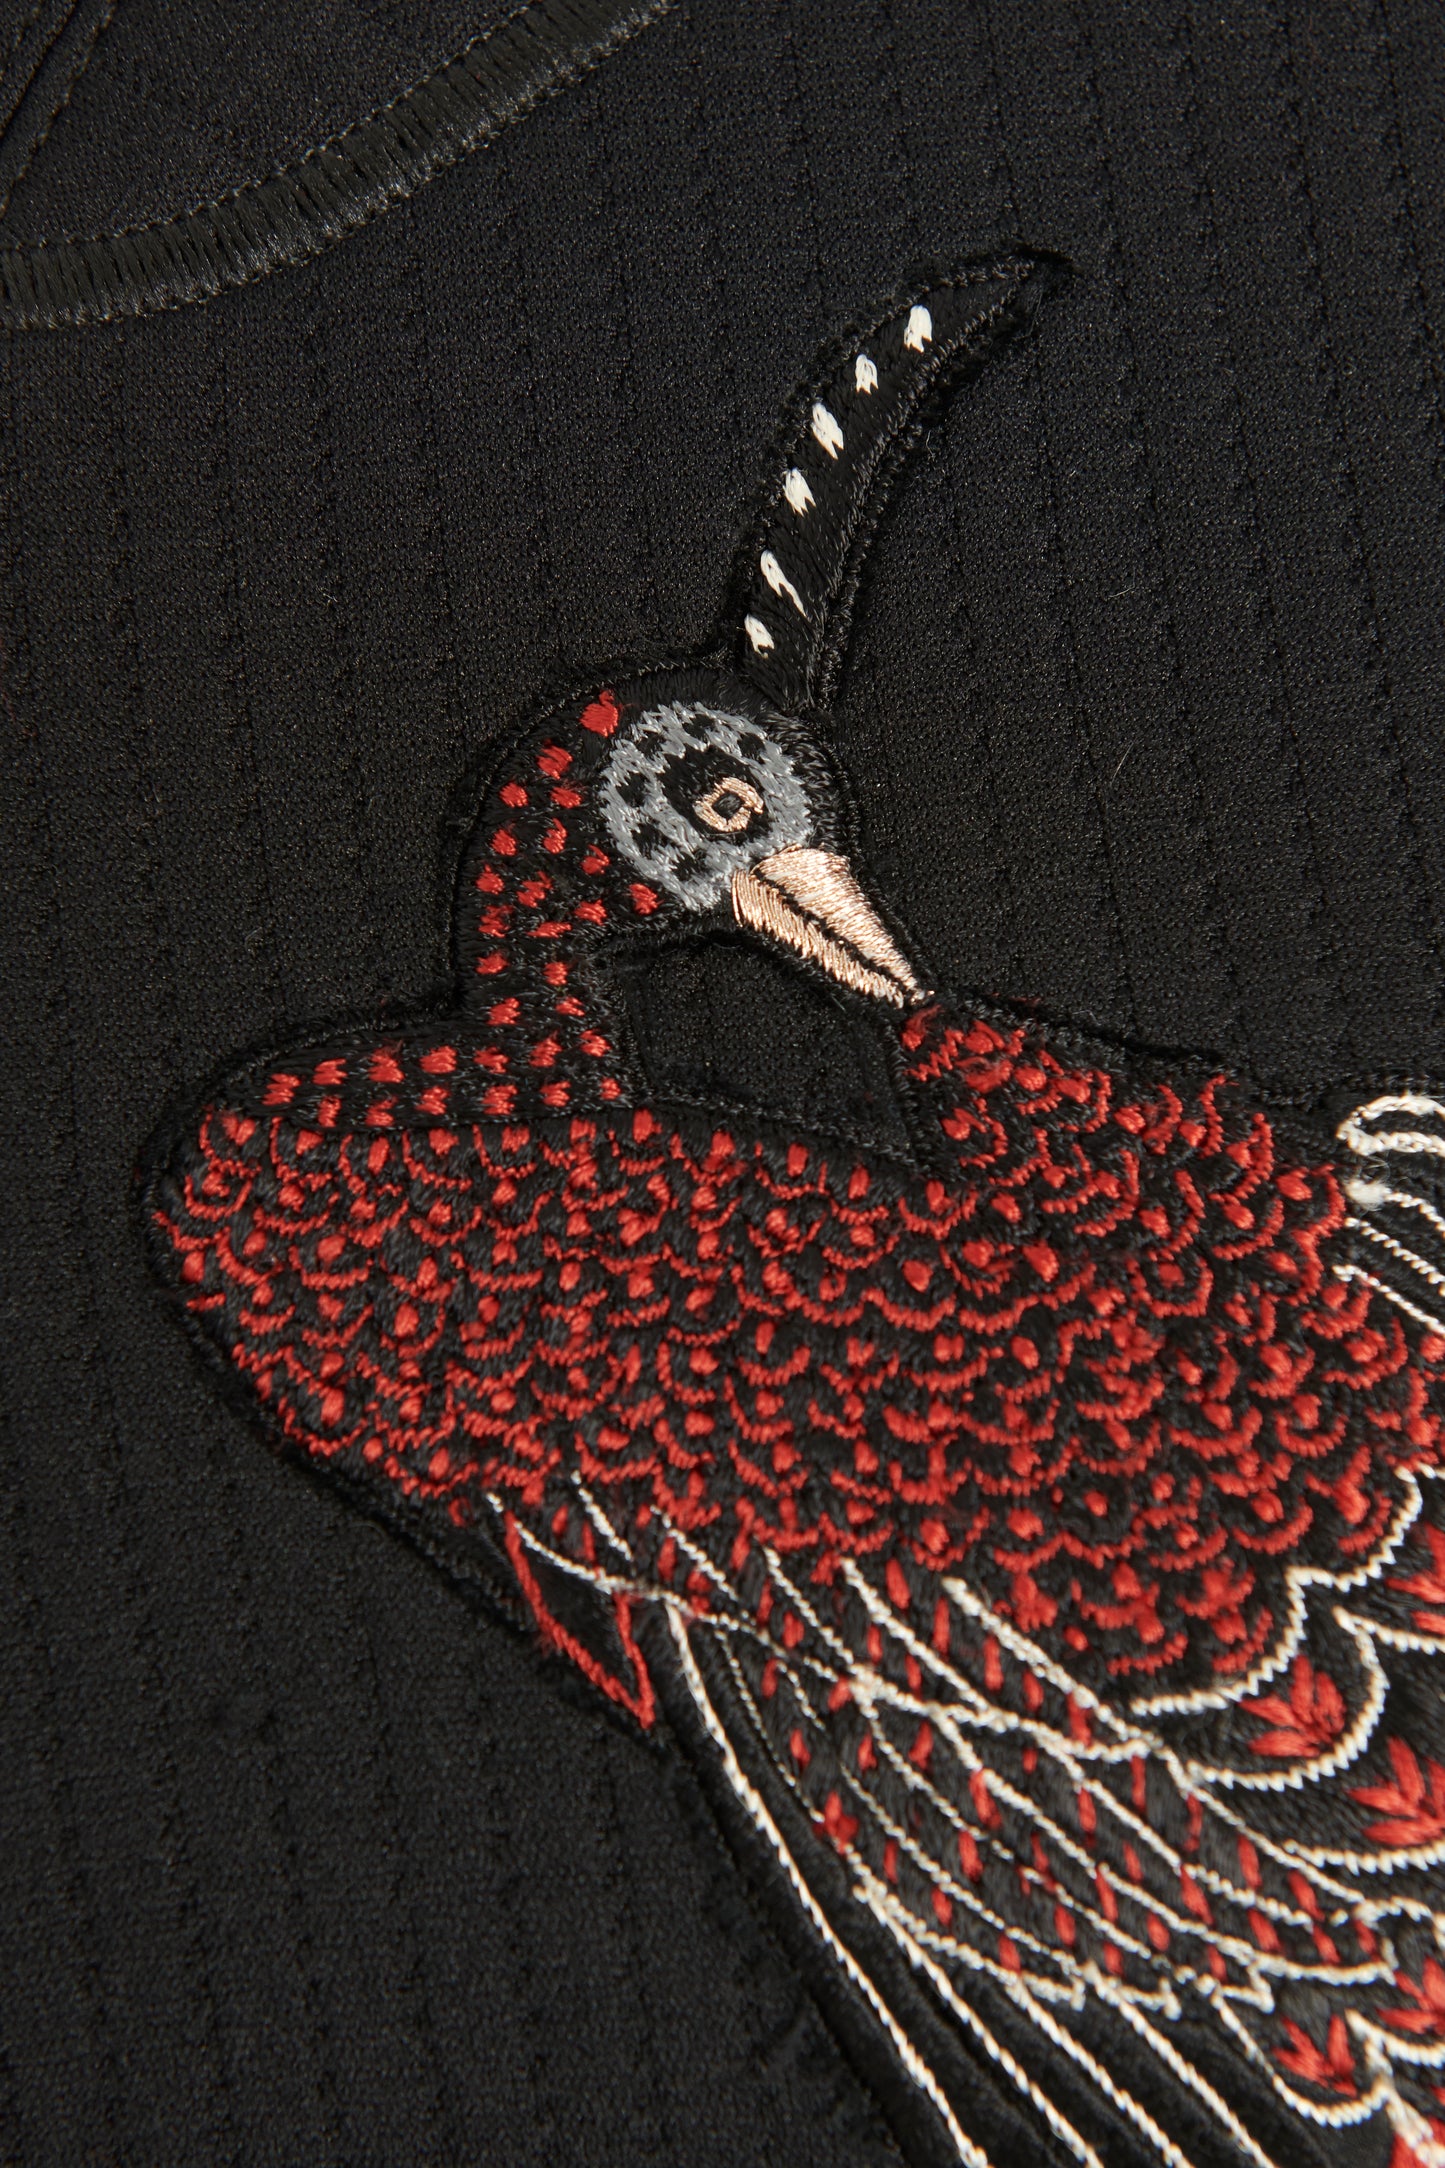 Fall 2012 Black Preowned Crewneck Sweater With Embroidered Peacocks